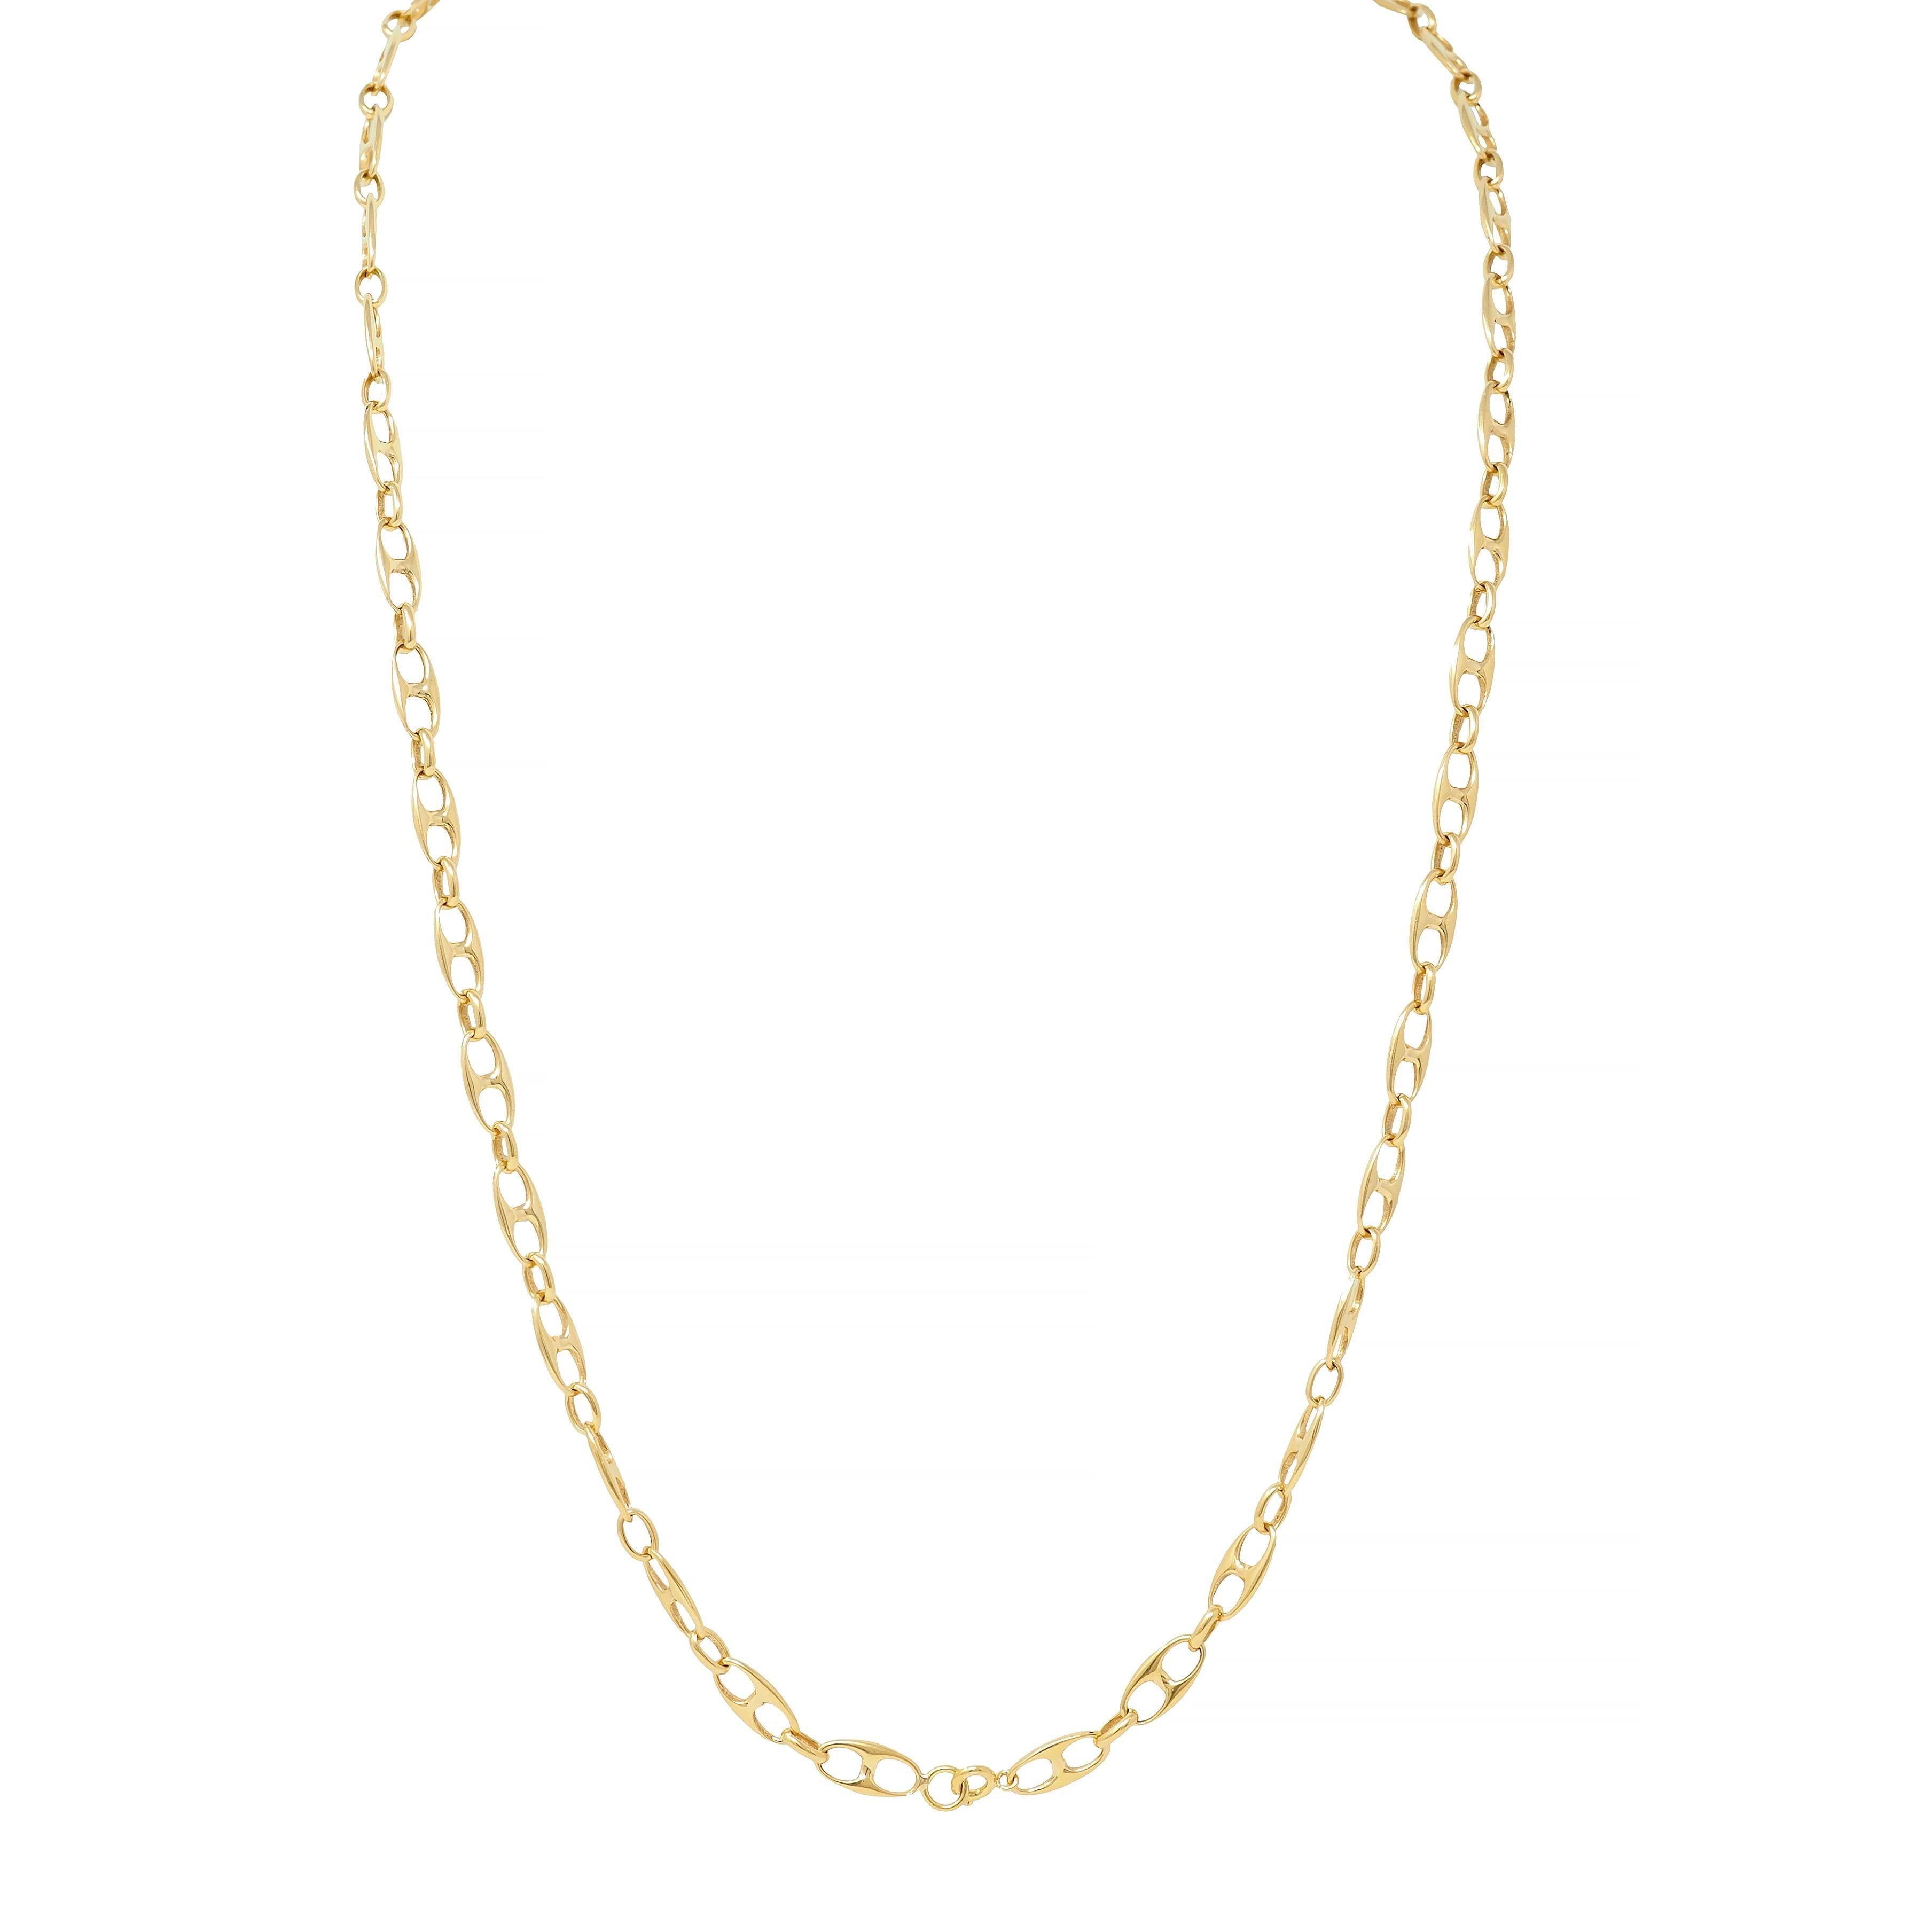 Vintage 18 Karat Yellow Gold Fancy Mariner Link Chain Necklace For Sale 5